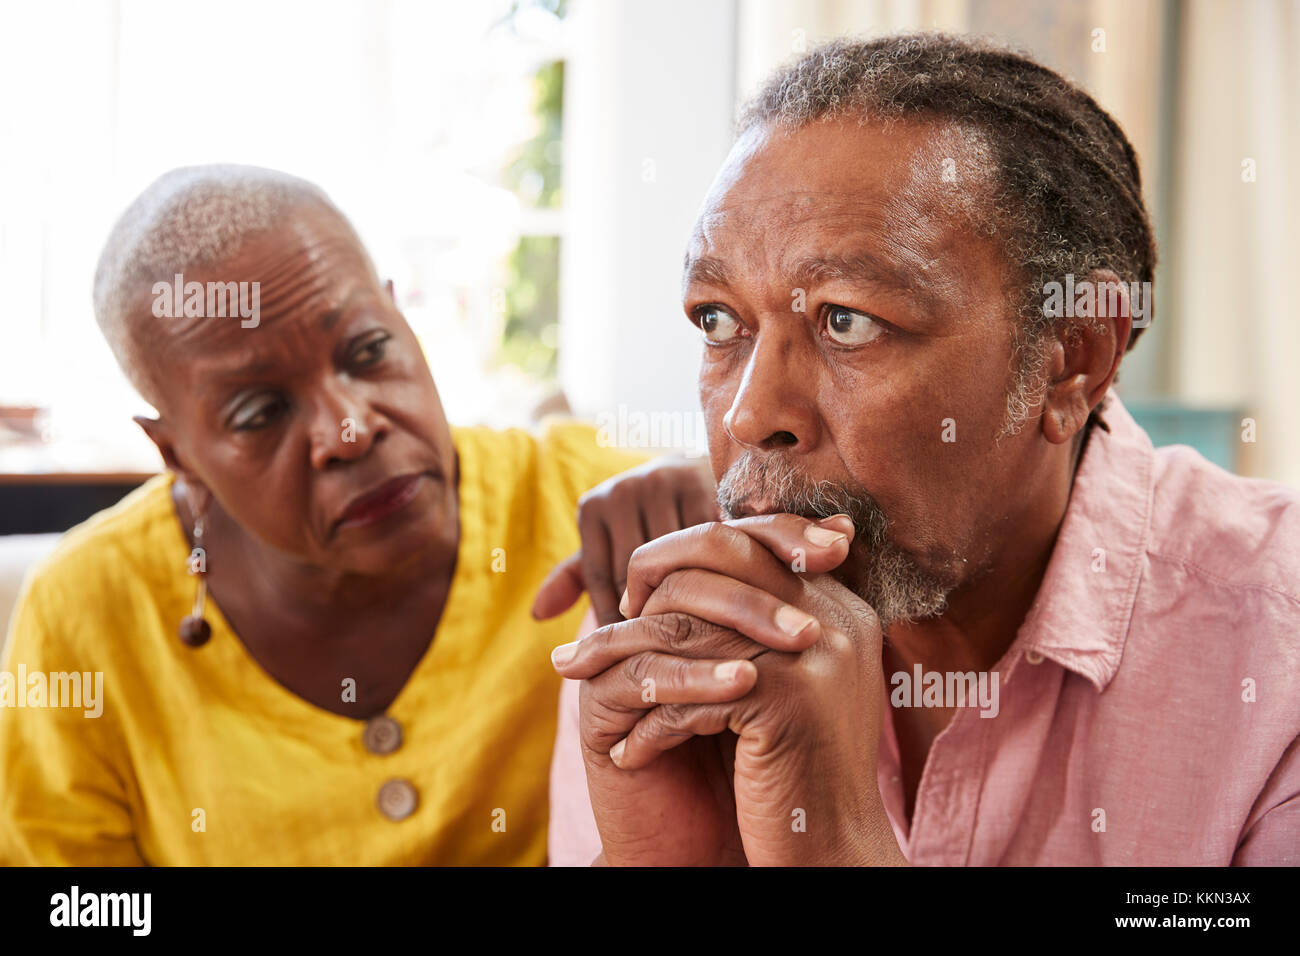 Senior Woman Comforting Man With Depression At Home Stock Photo